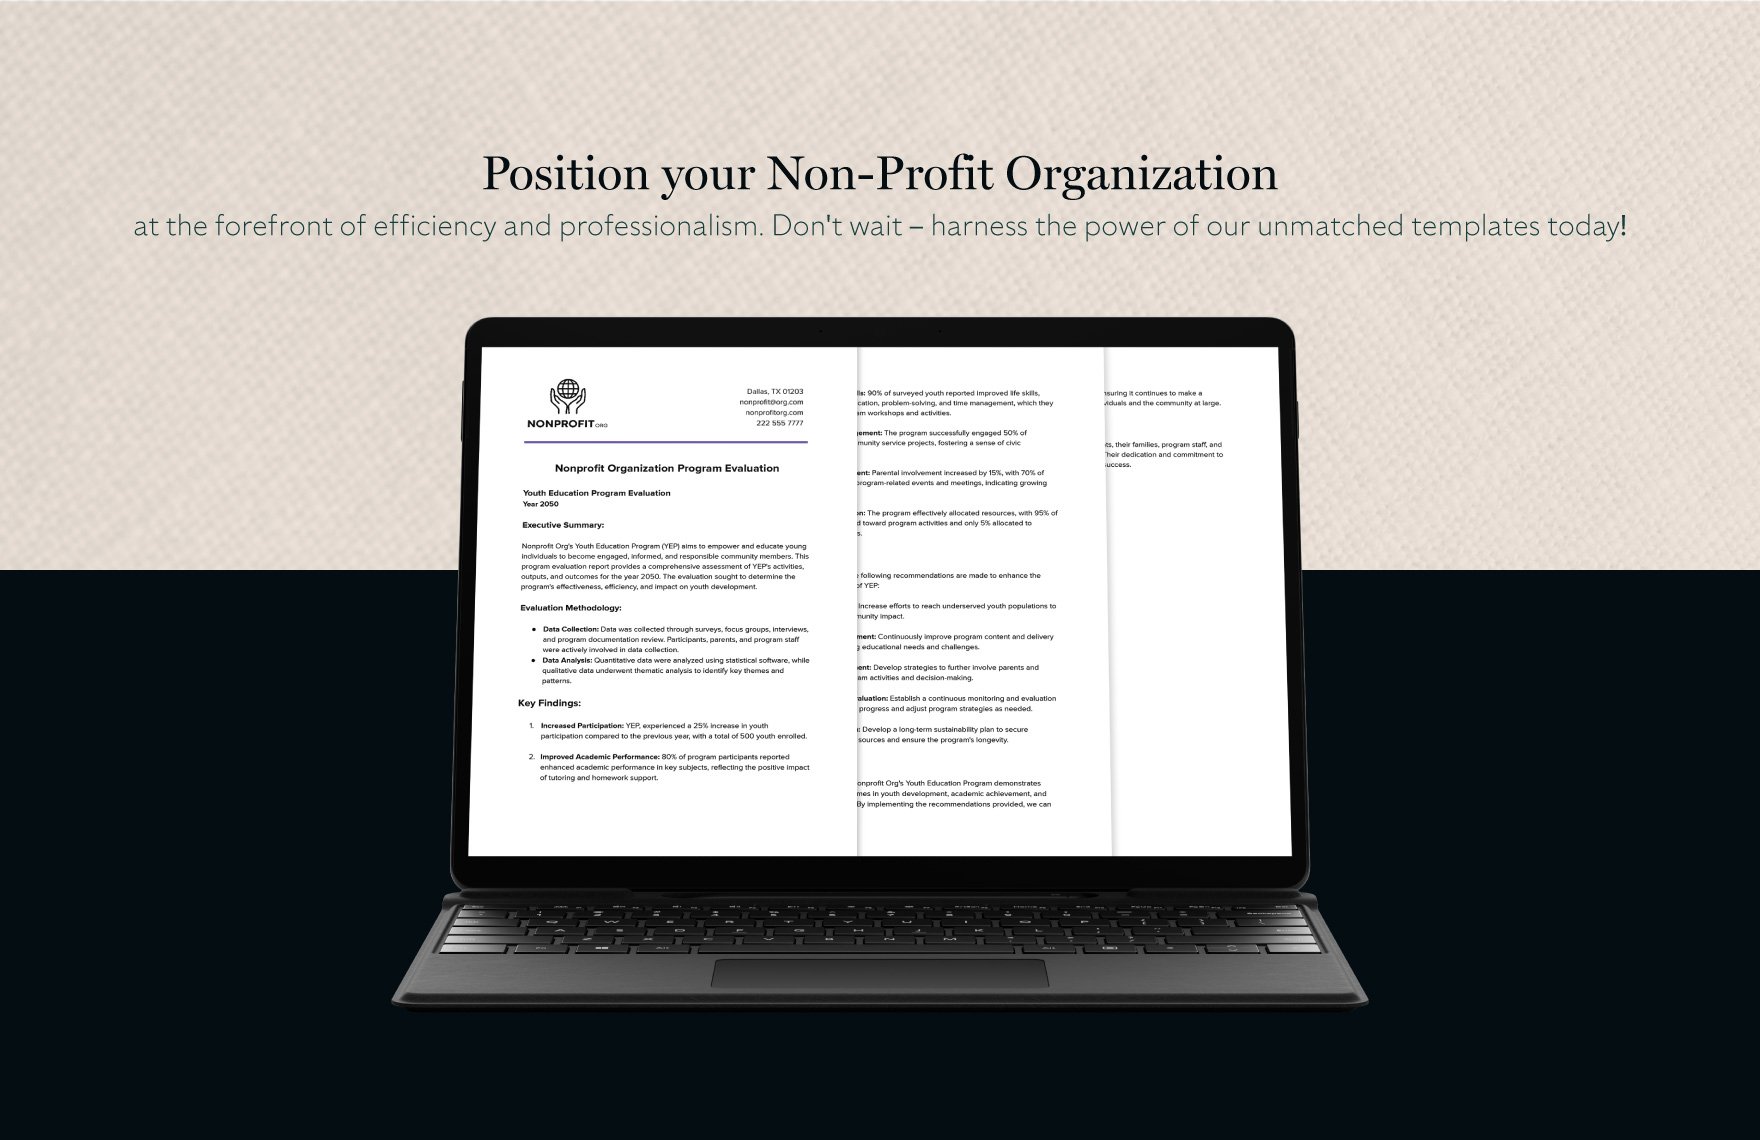 How to Create a Program Evaluation for Your Non-Profit